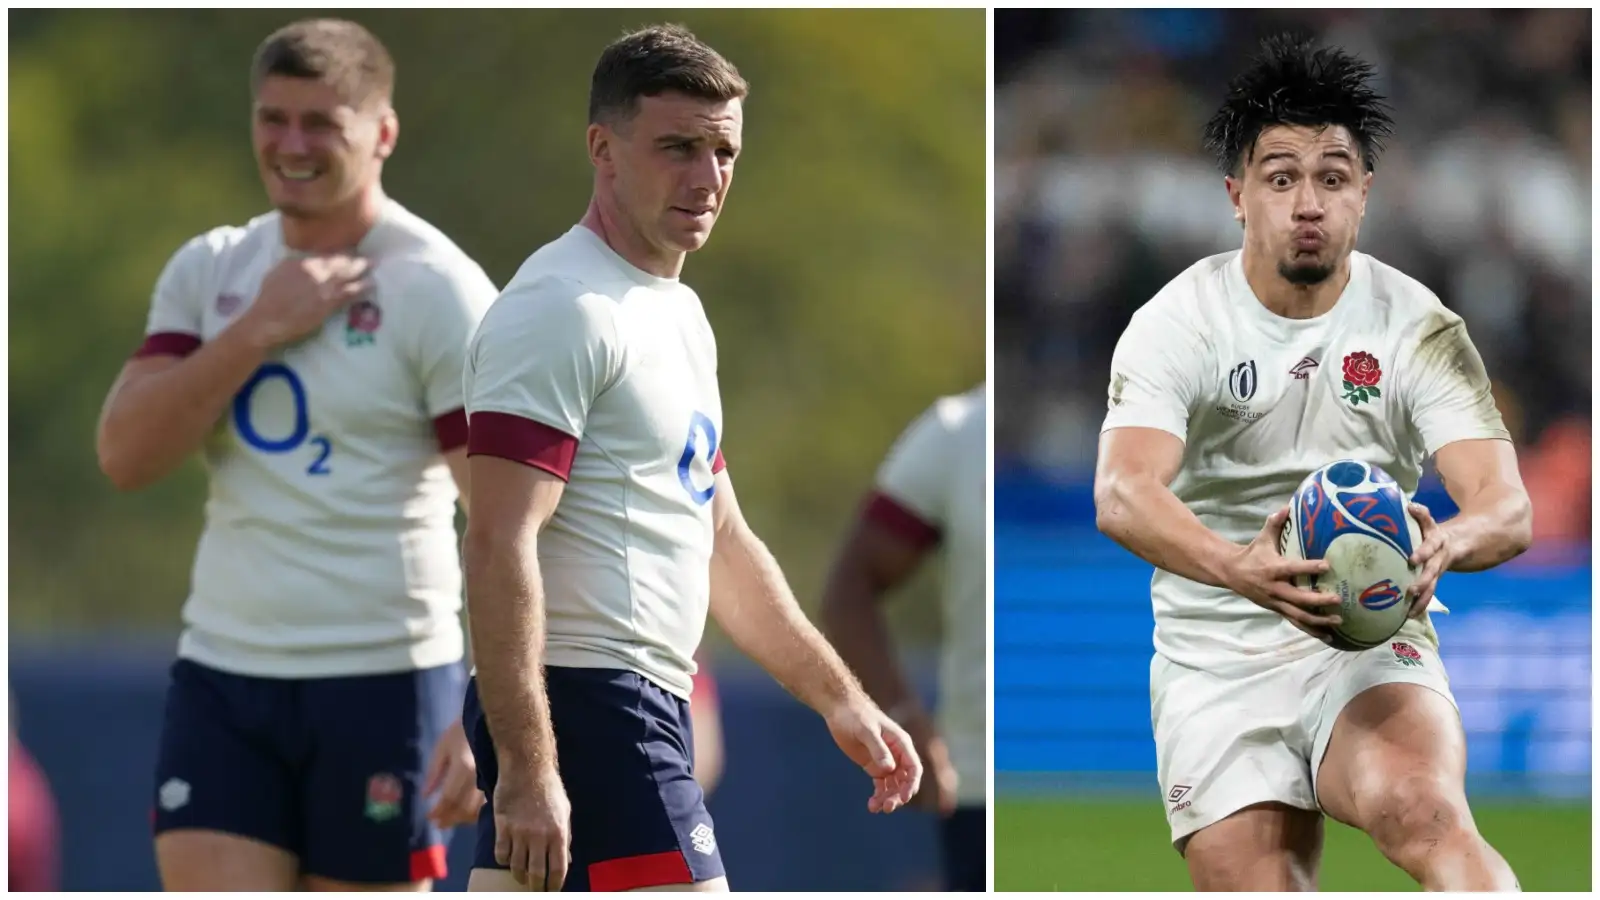 England fly-half candidates for the Six Nations, Owen Farrell, George Ford and Marcus Smith.